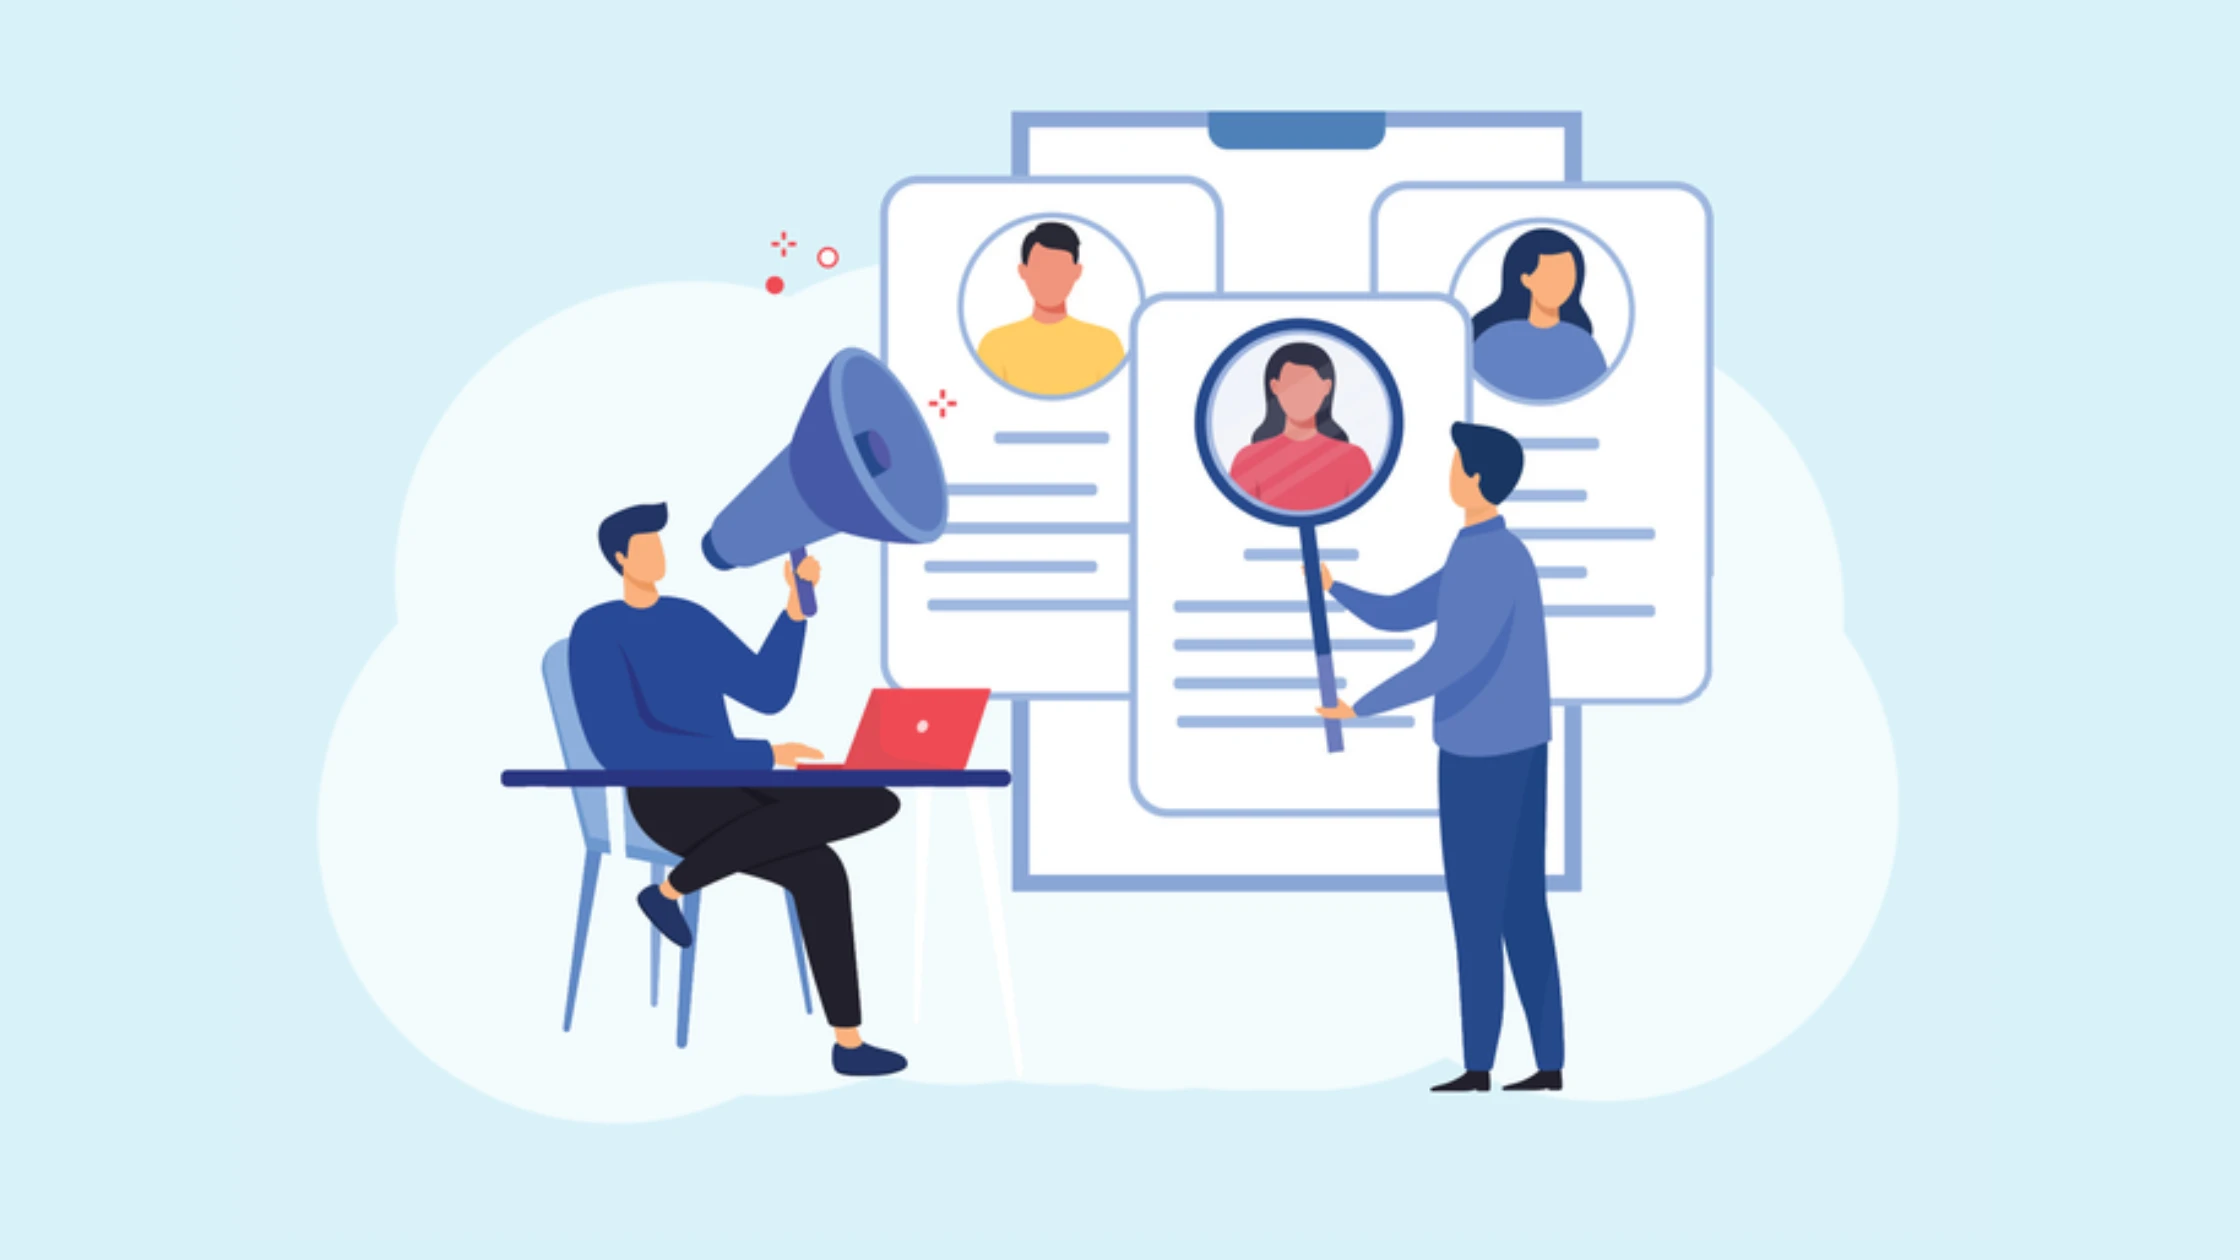 What is Recruitment Marketing? - Complete Guide